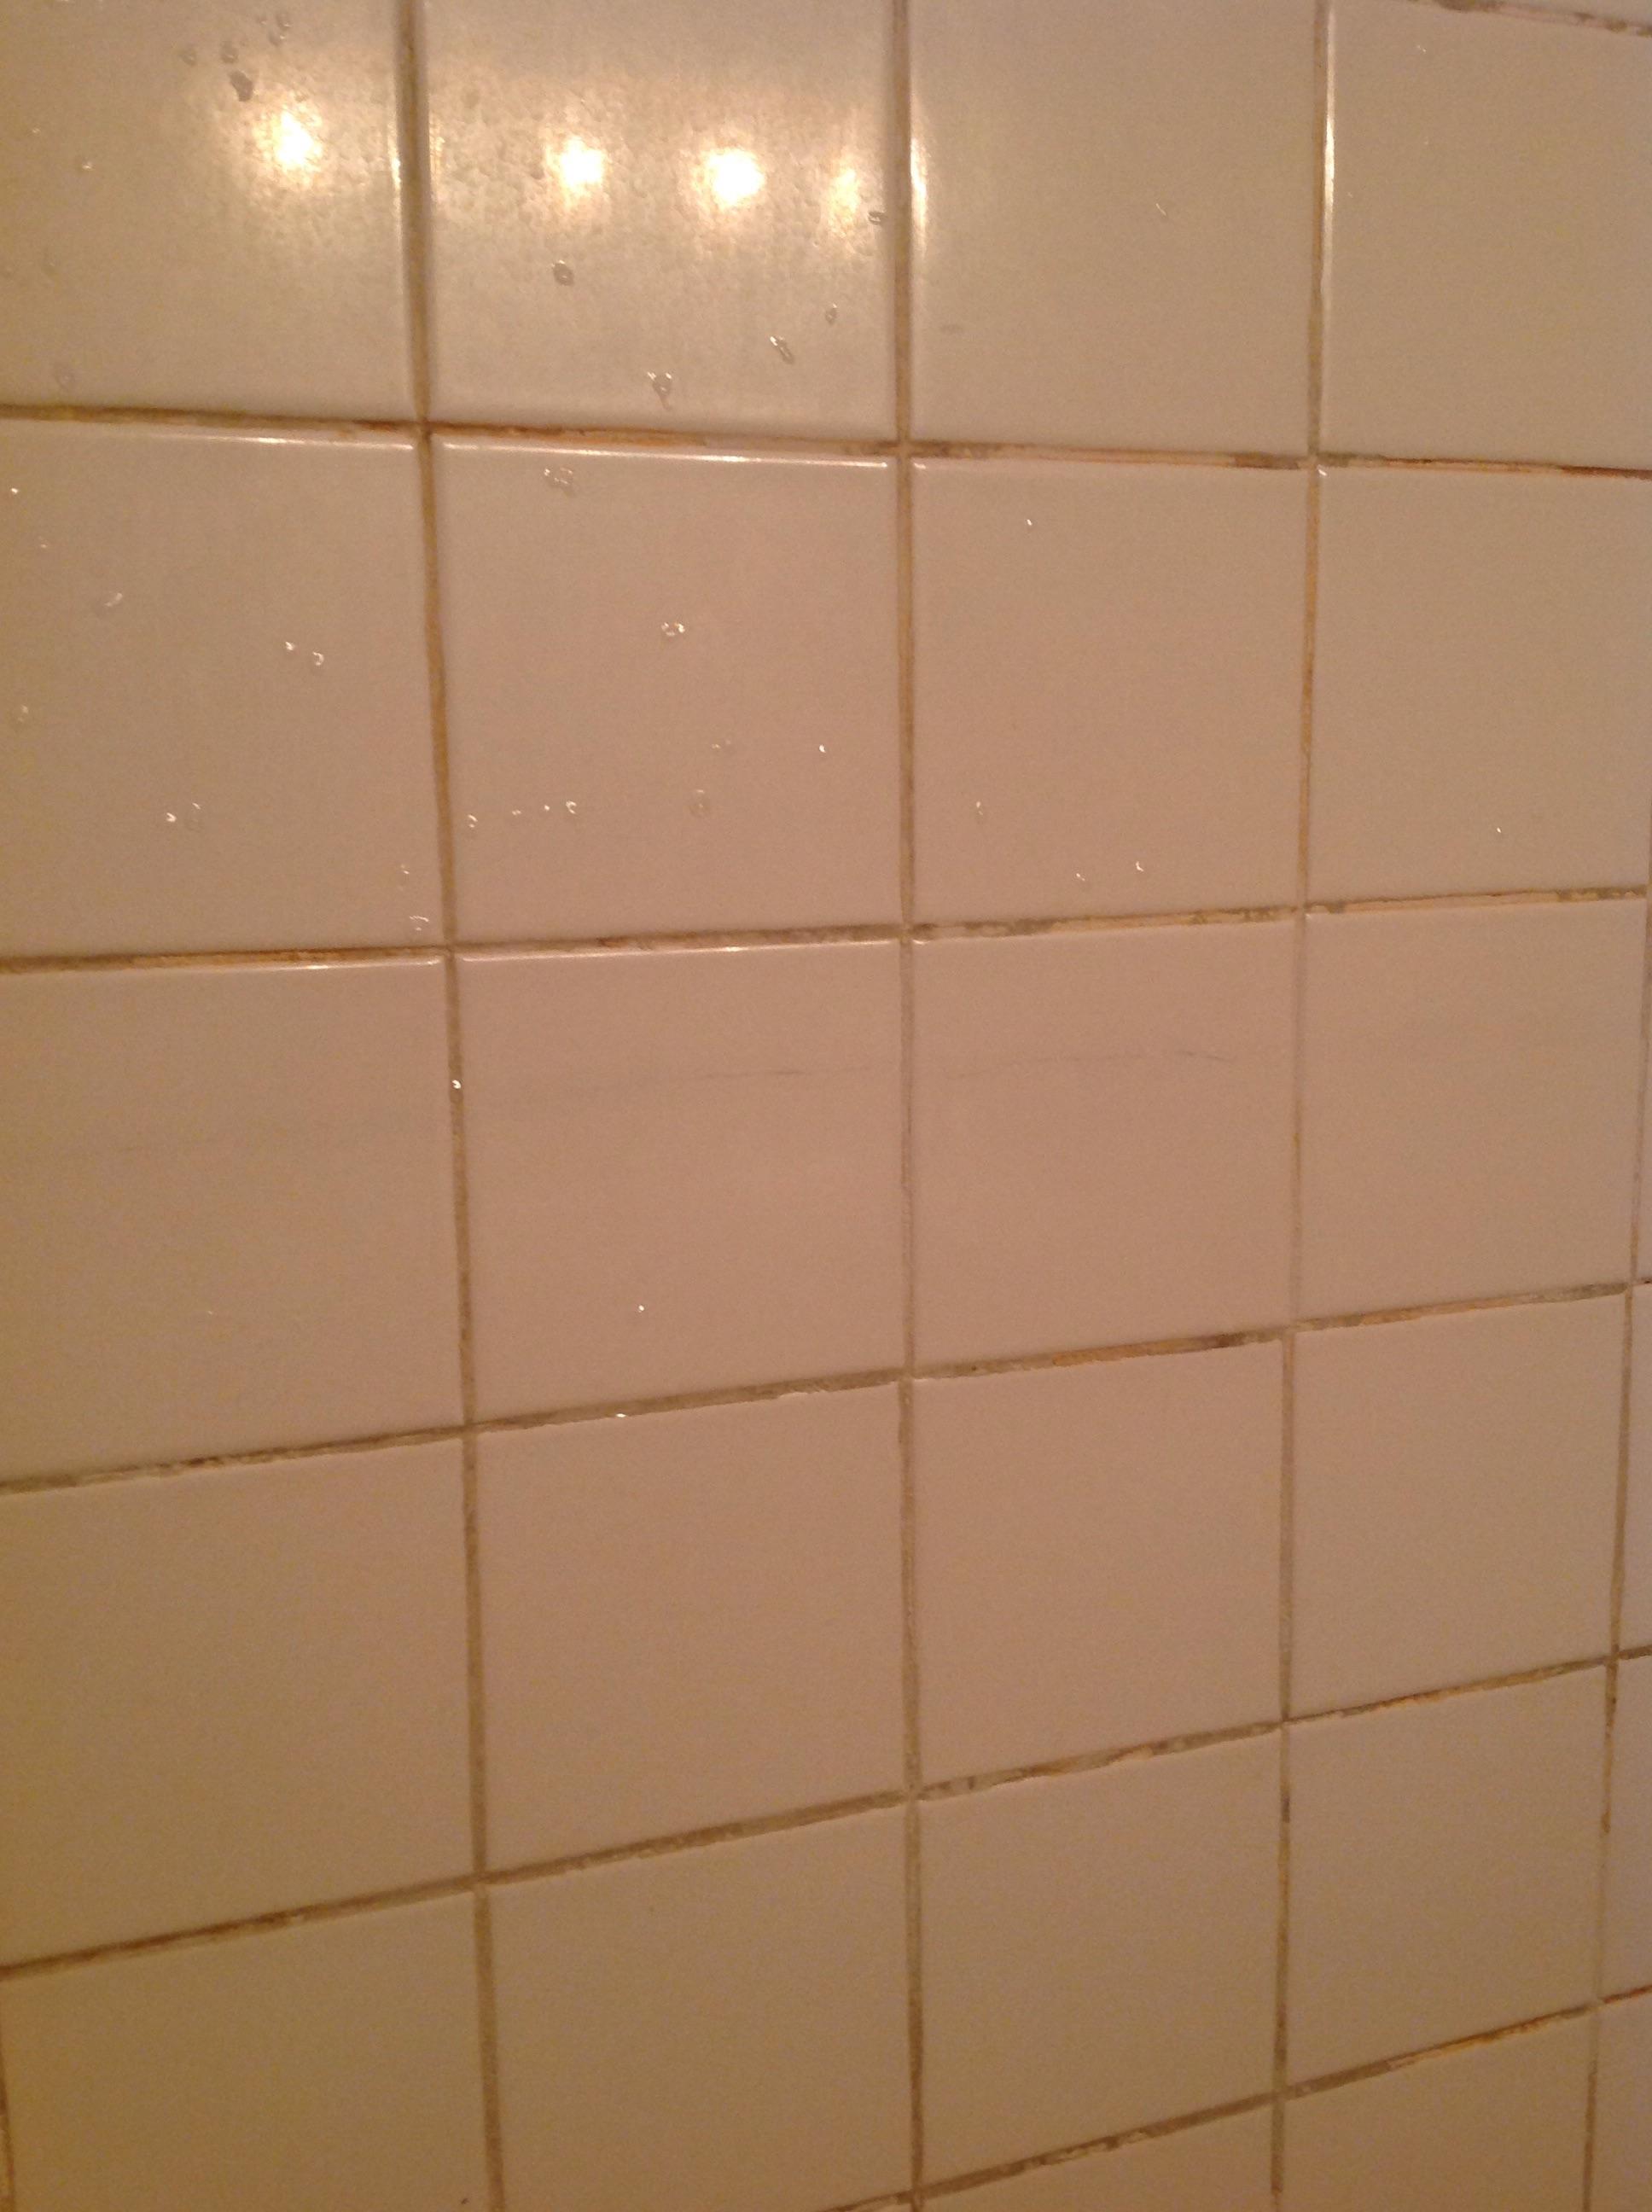 repair - Cracked bathroom tile - runs almost entire length of the ...